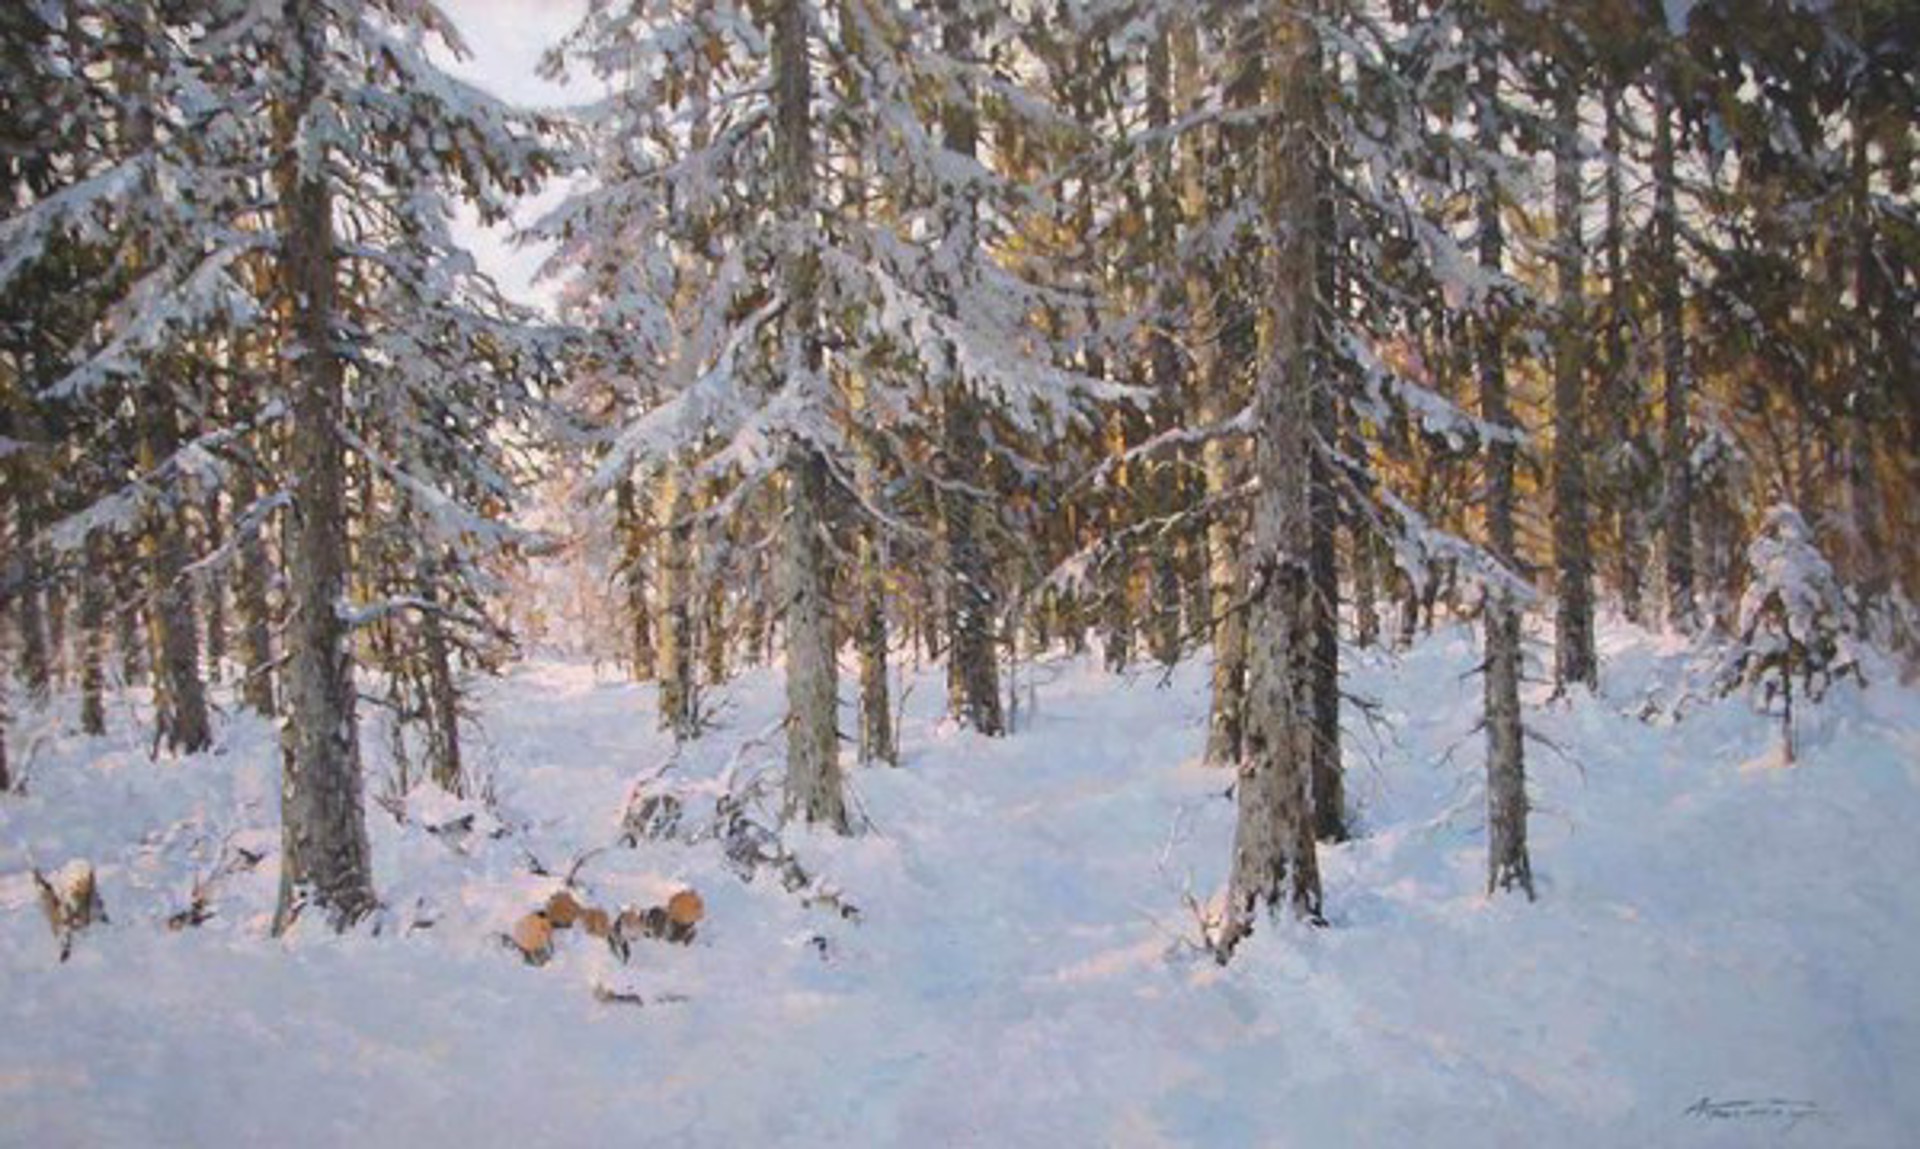 Snow In The Forest by Alexander Kremer